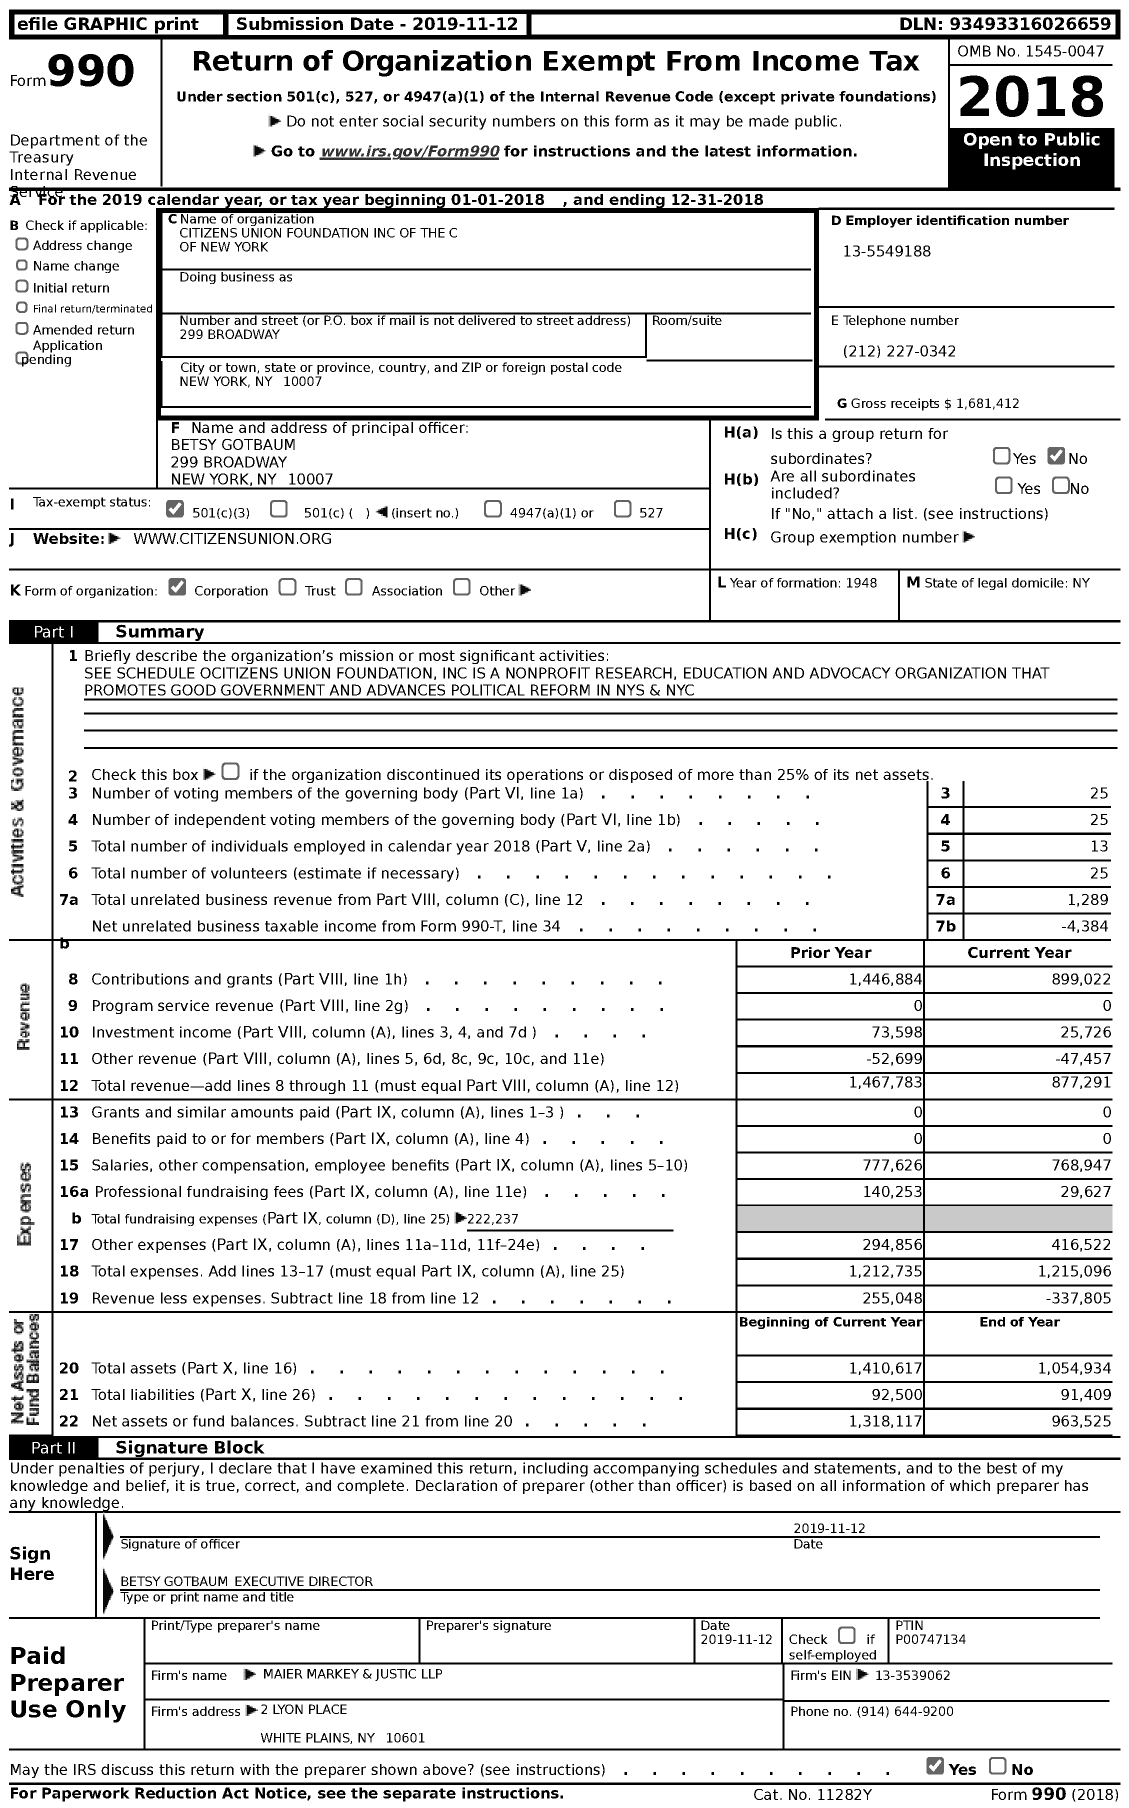 Image of first page of 2018 Form 990 for Citizens Union Foundation of the City of New York